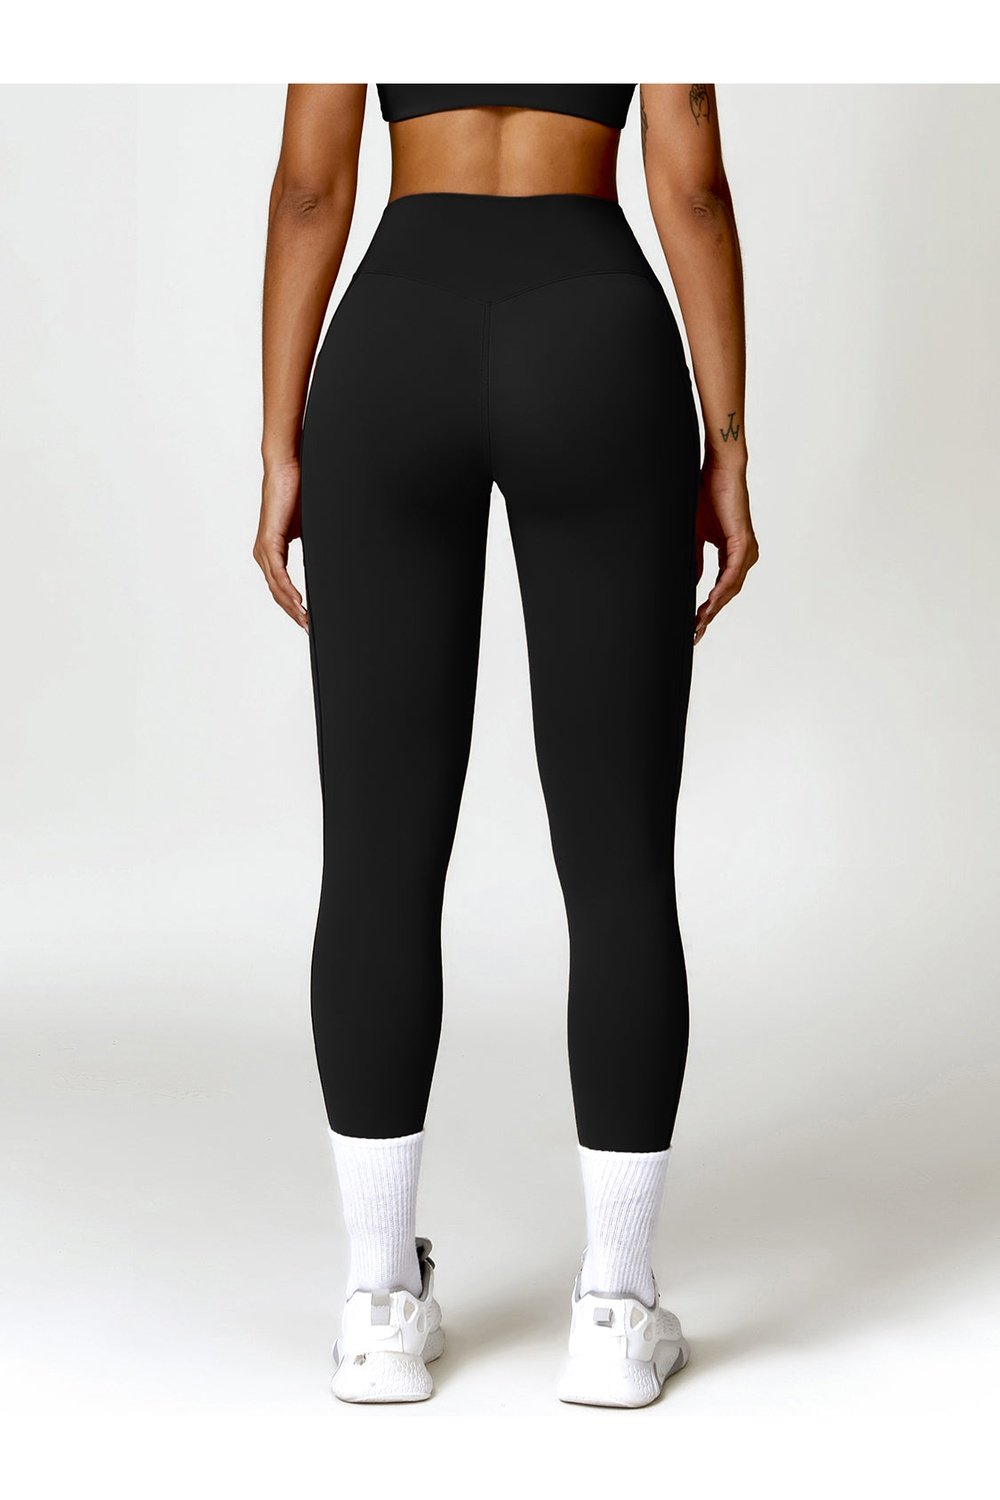 Twisted High Waist Active Pants with Pockets - Leggings - FITGGINS